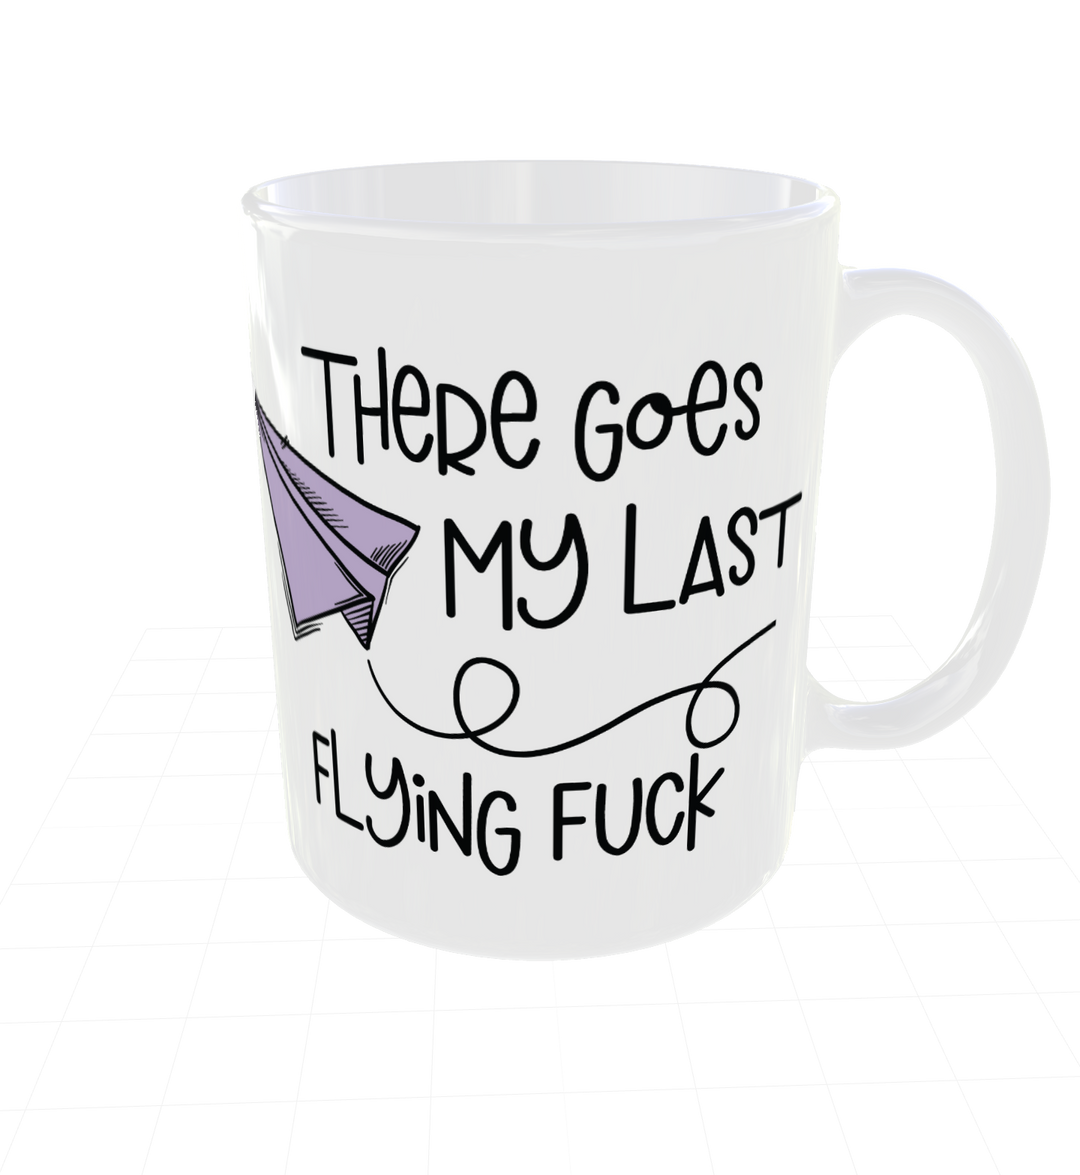 no boring gift box delivery here! Add a sweary and unique mug to your gift box and make it fly!